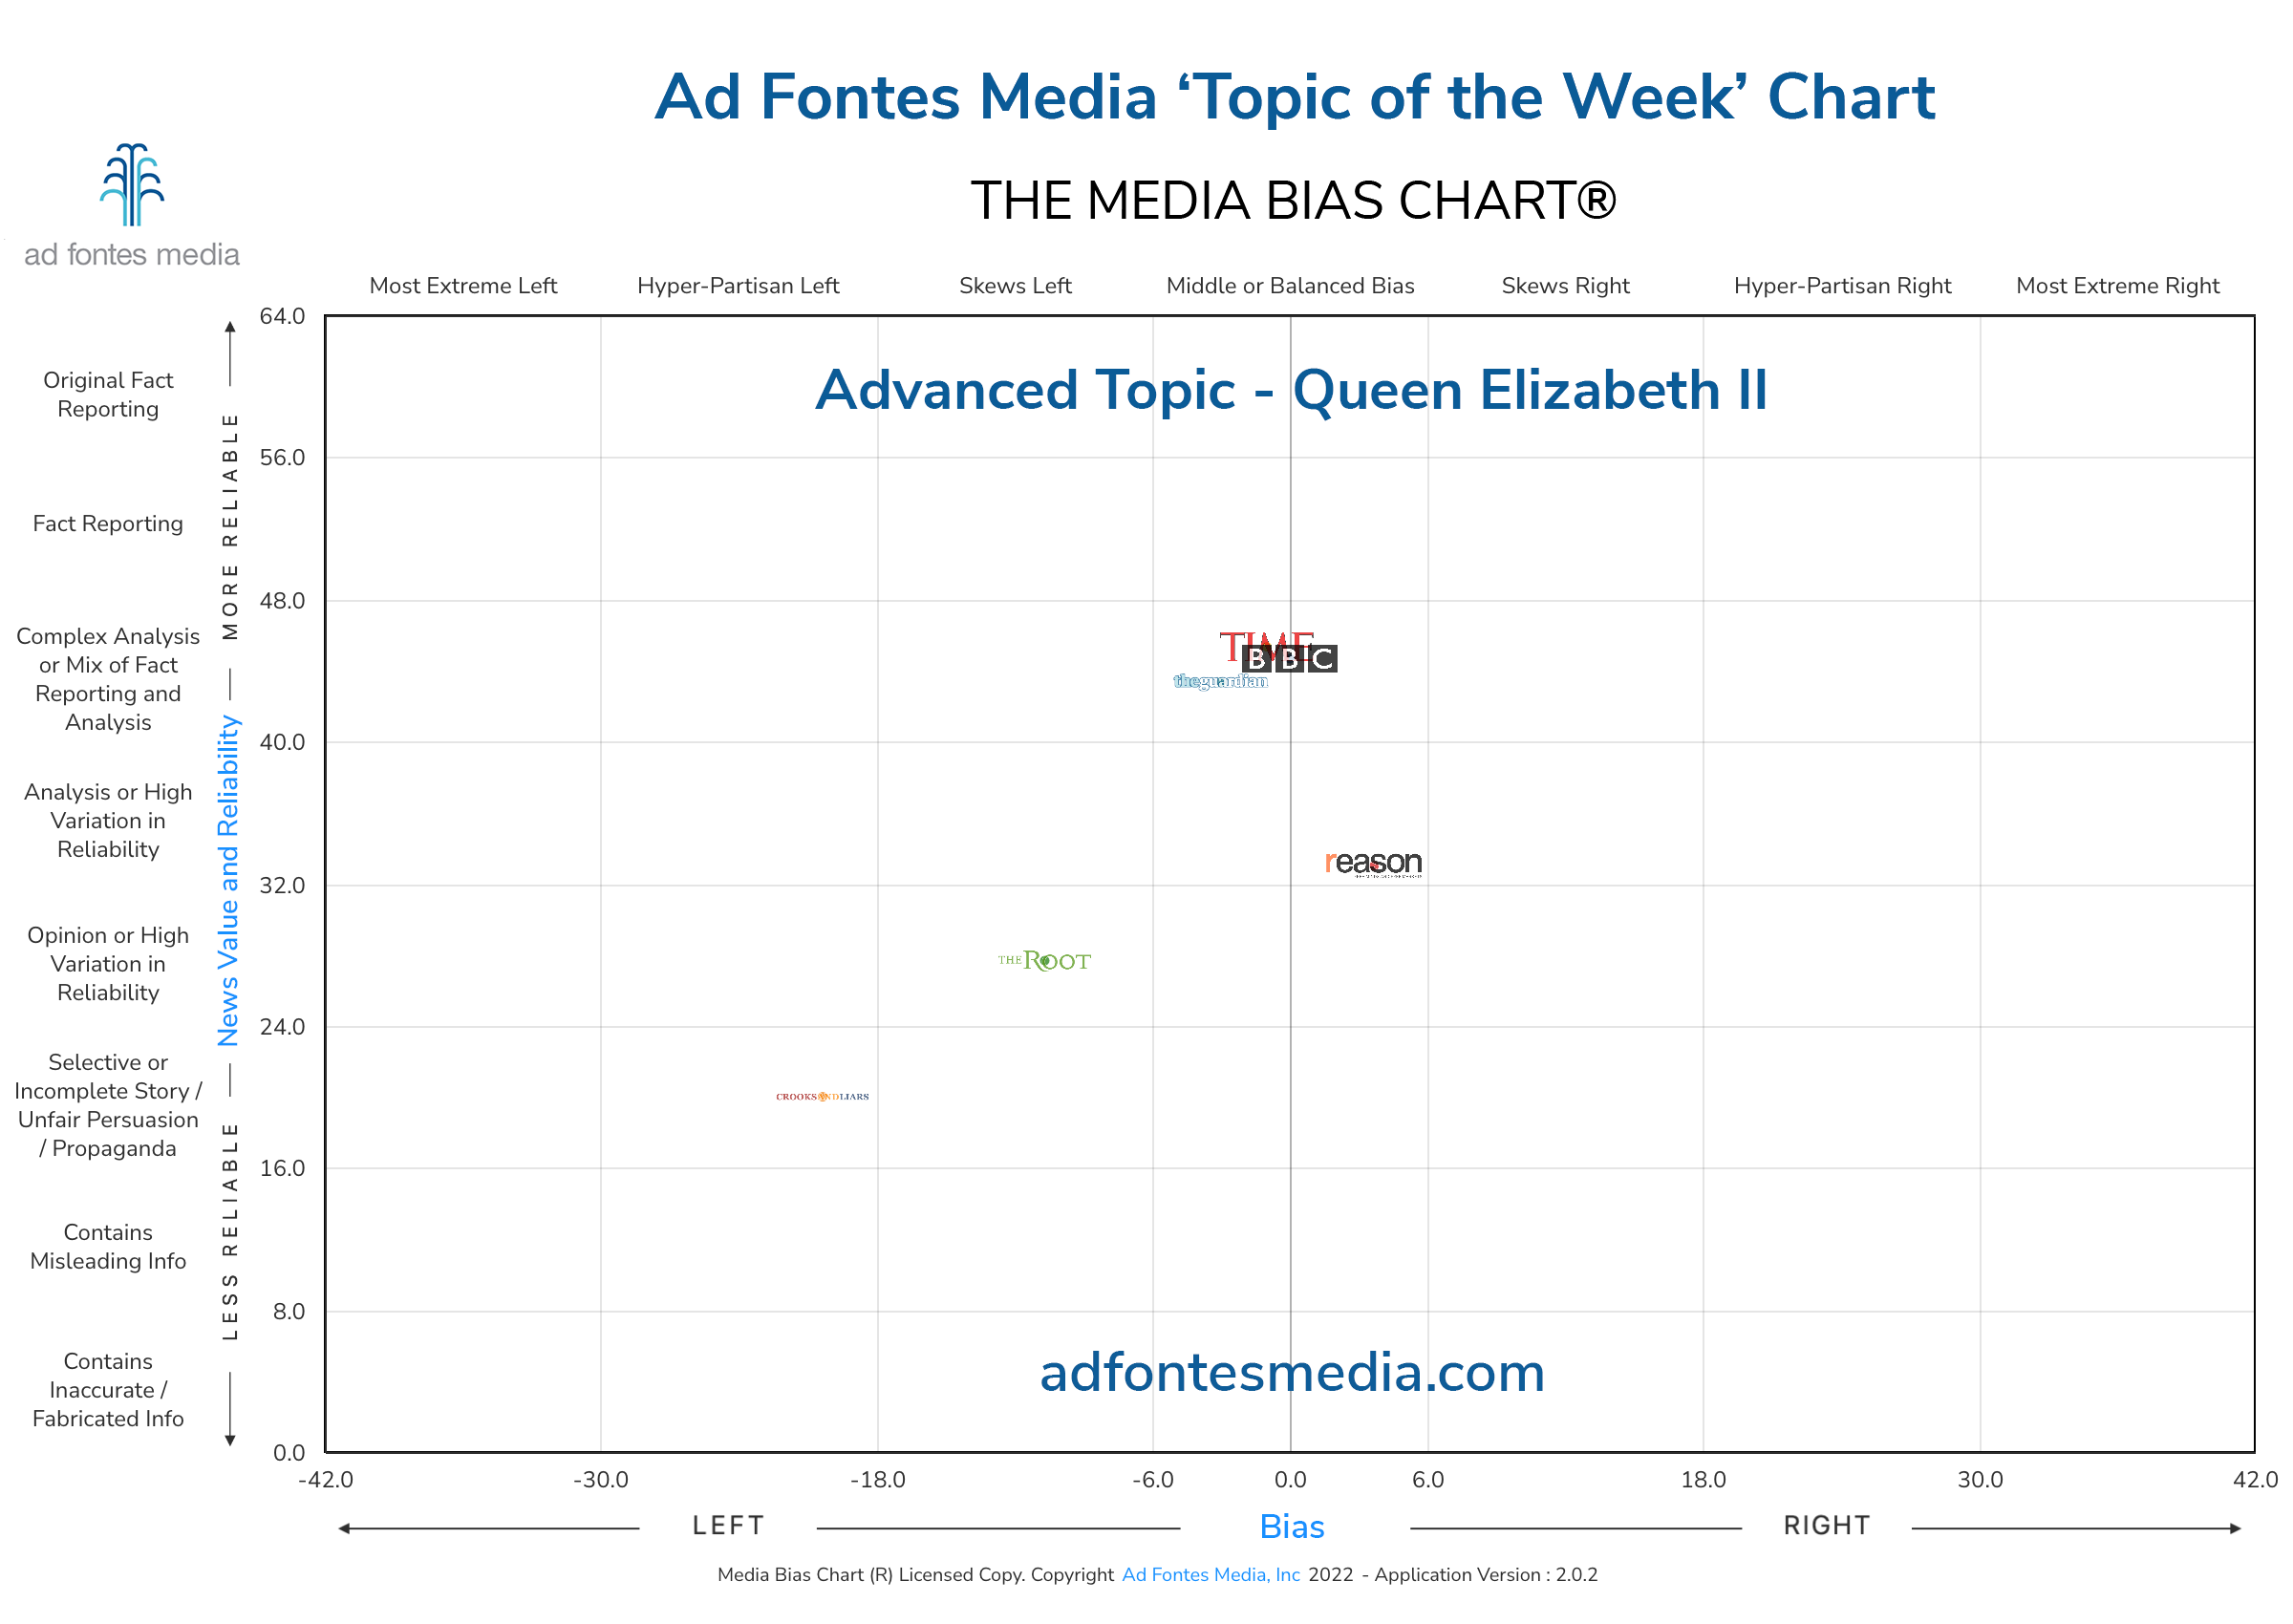 Scores of the Queen Elizabeth II articles on the chart